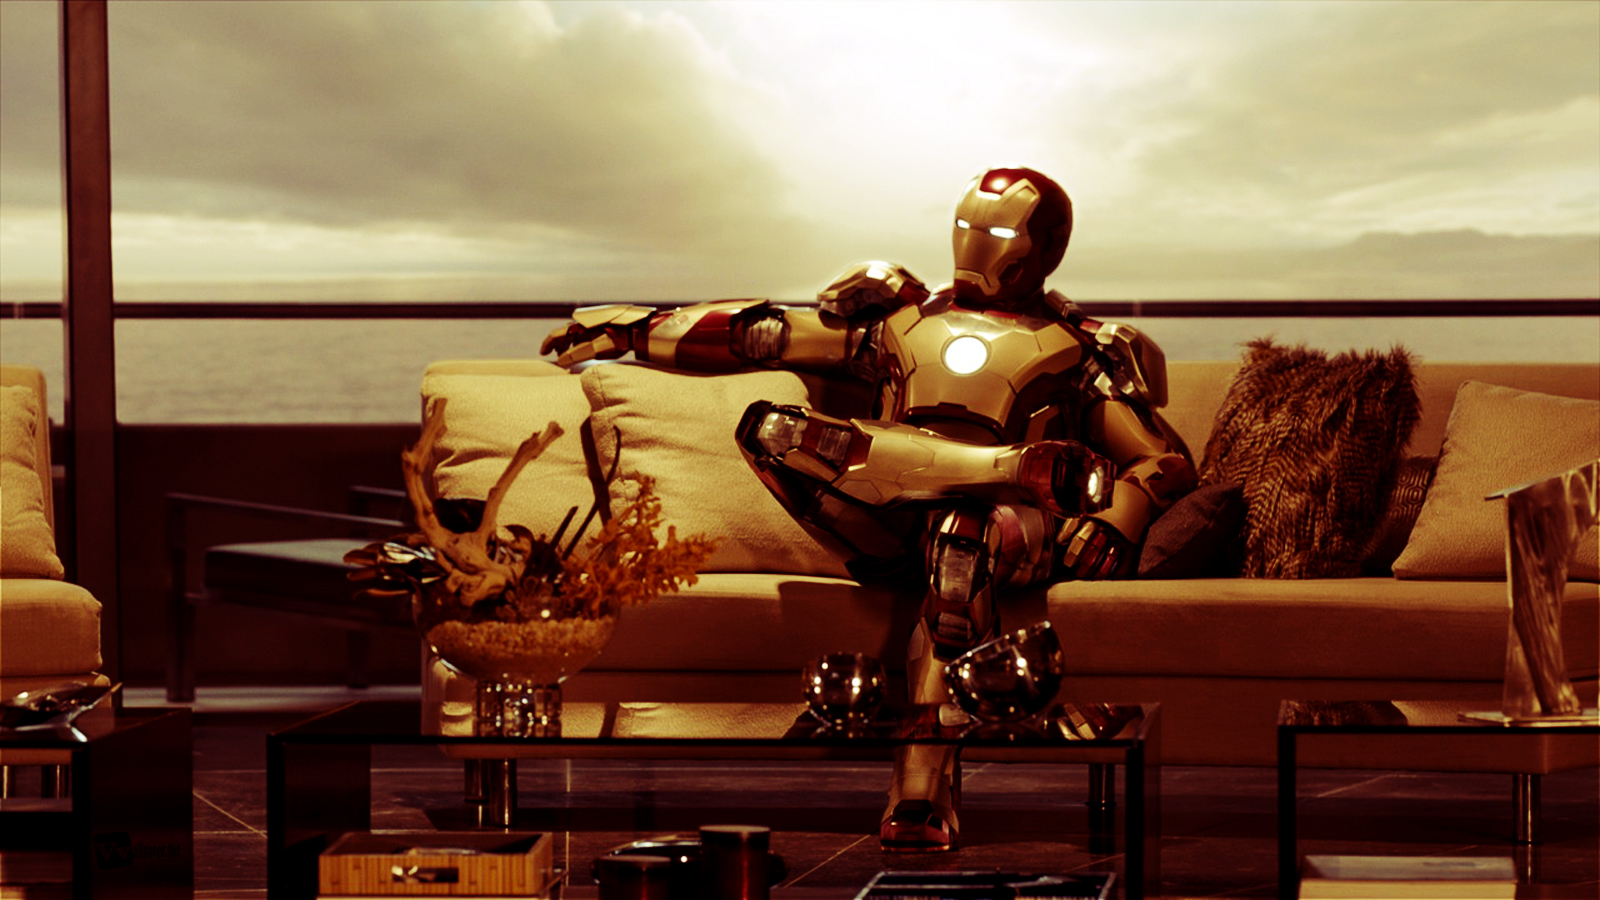 Iron Man 3 Movie HD Wallpapers and Poster Download Free Wallpapers